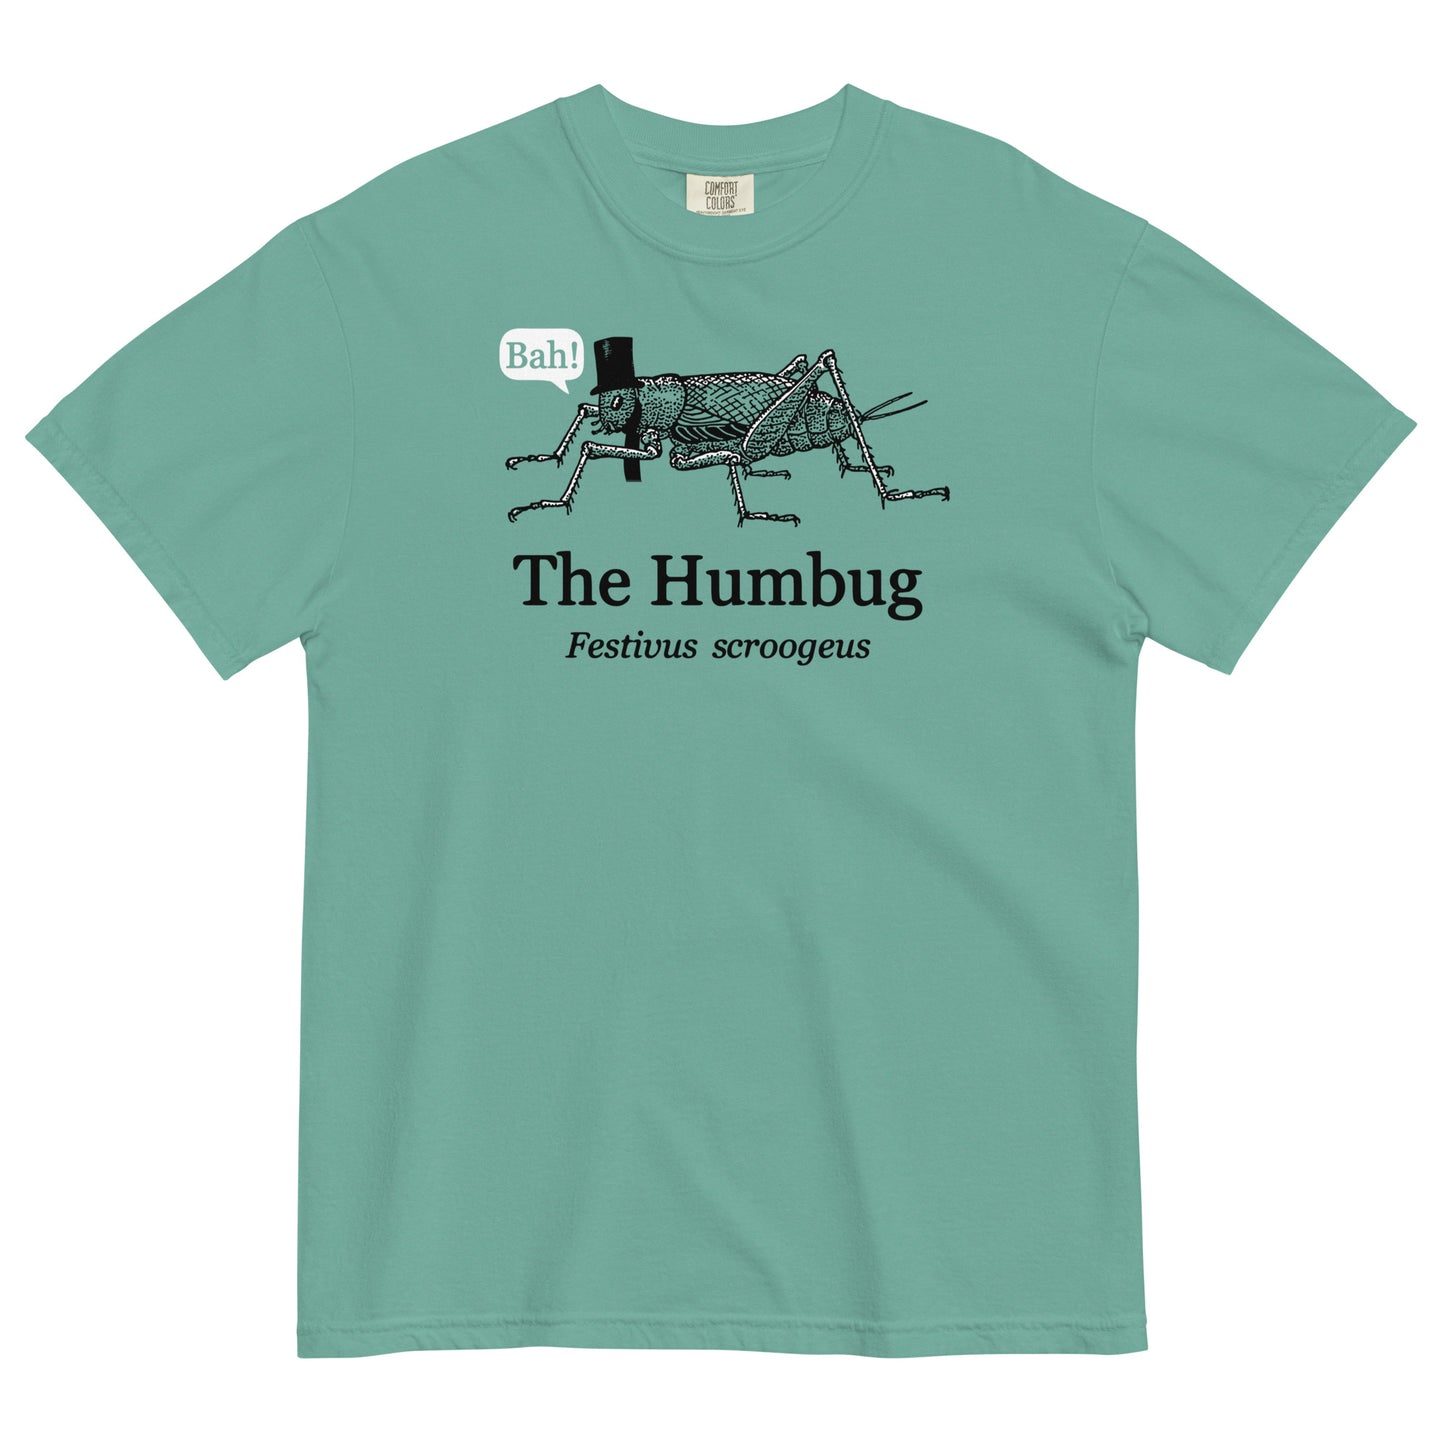 The Humbug Men's Relaxed Fit Tee